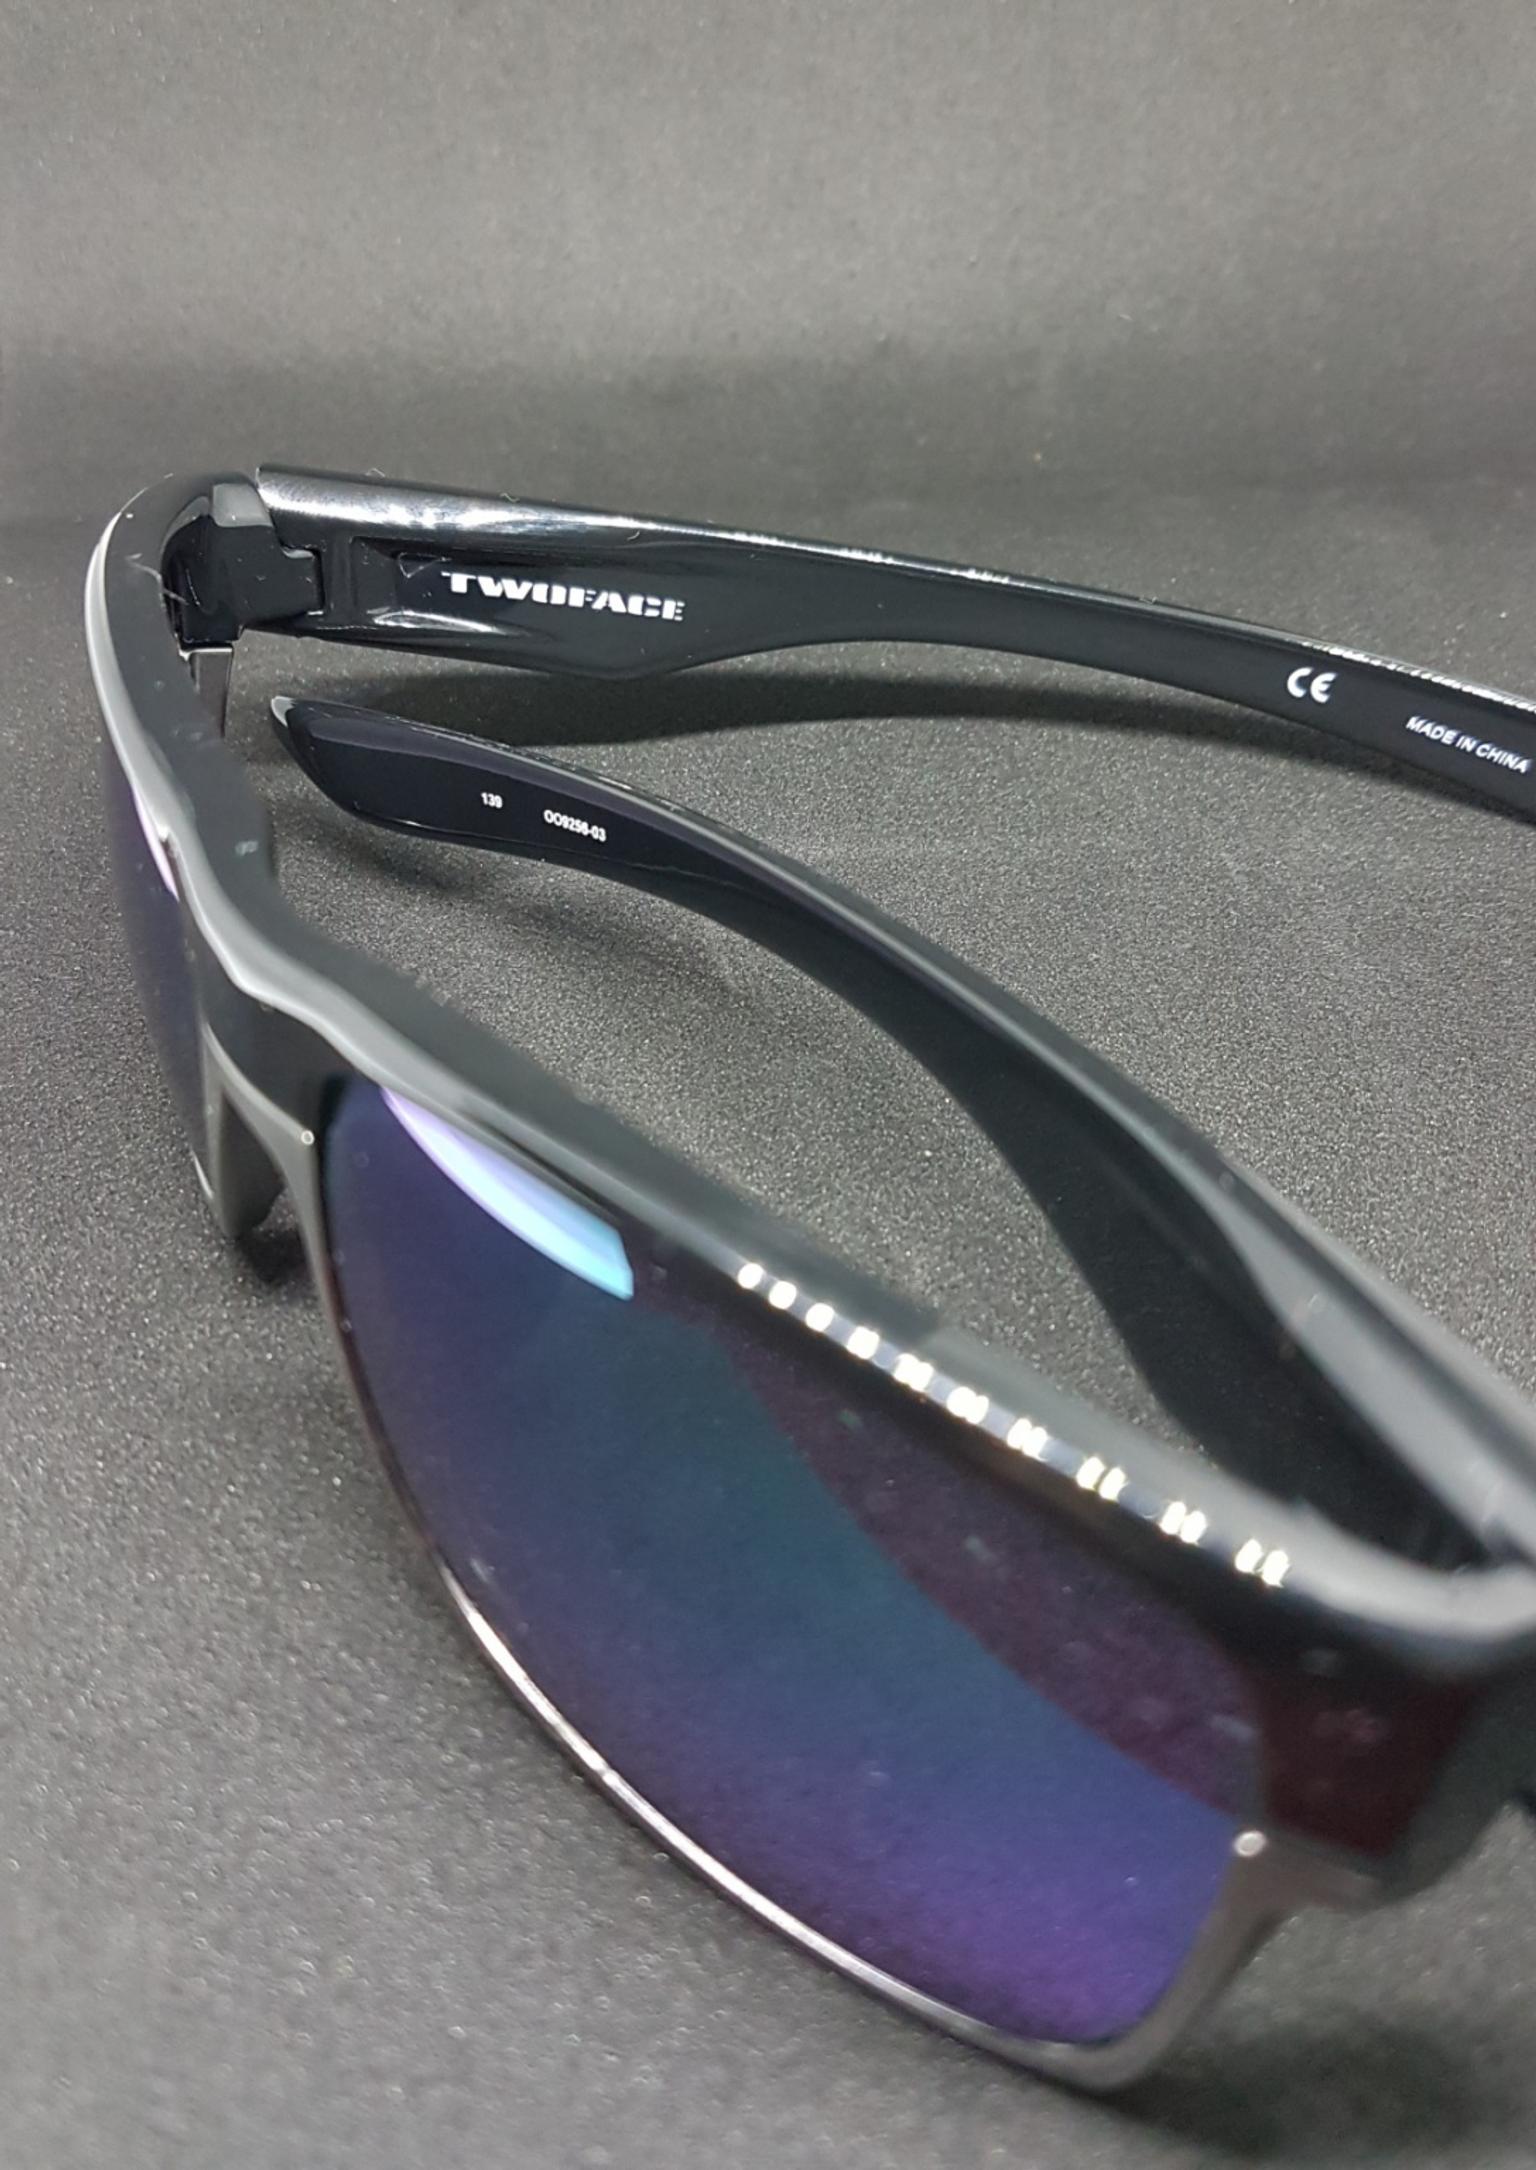 oakleys made in china